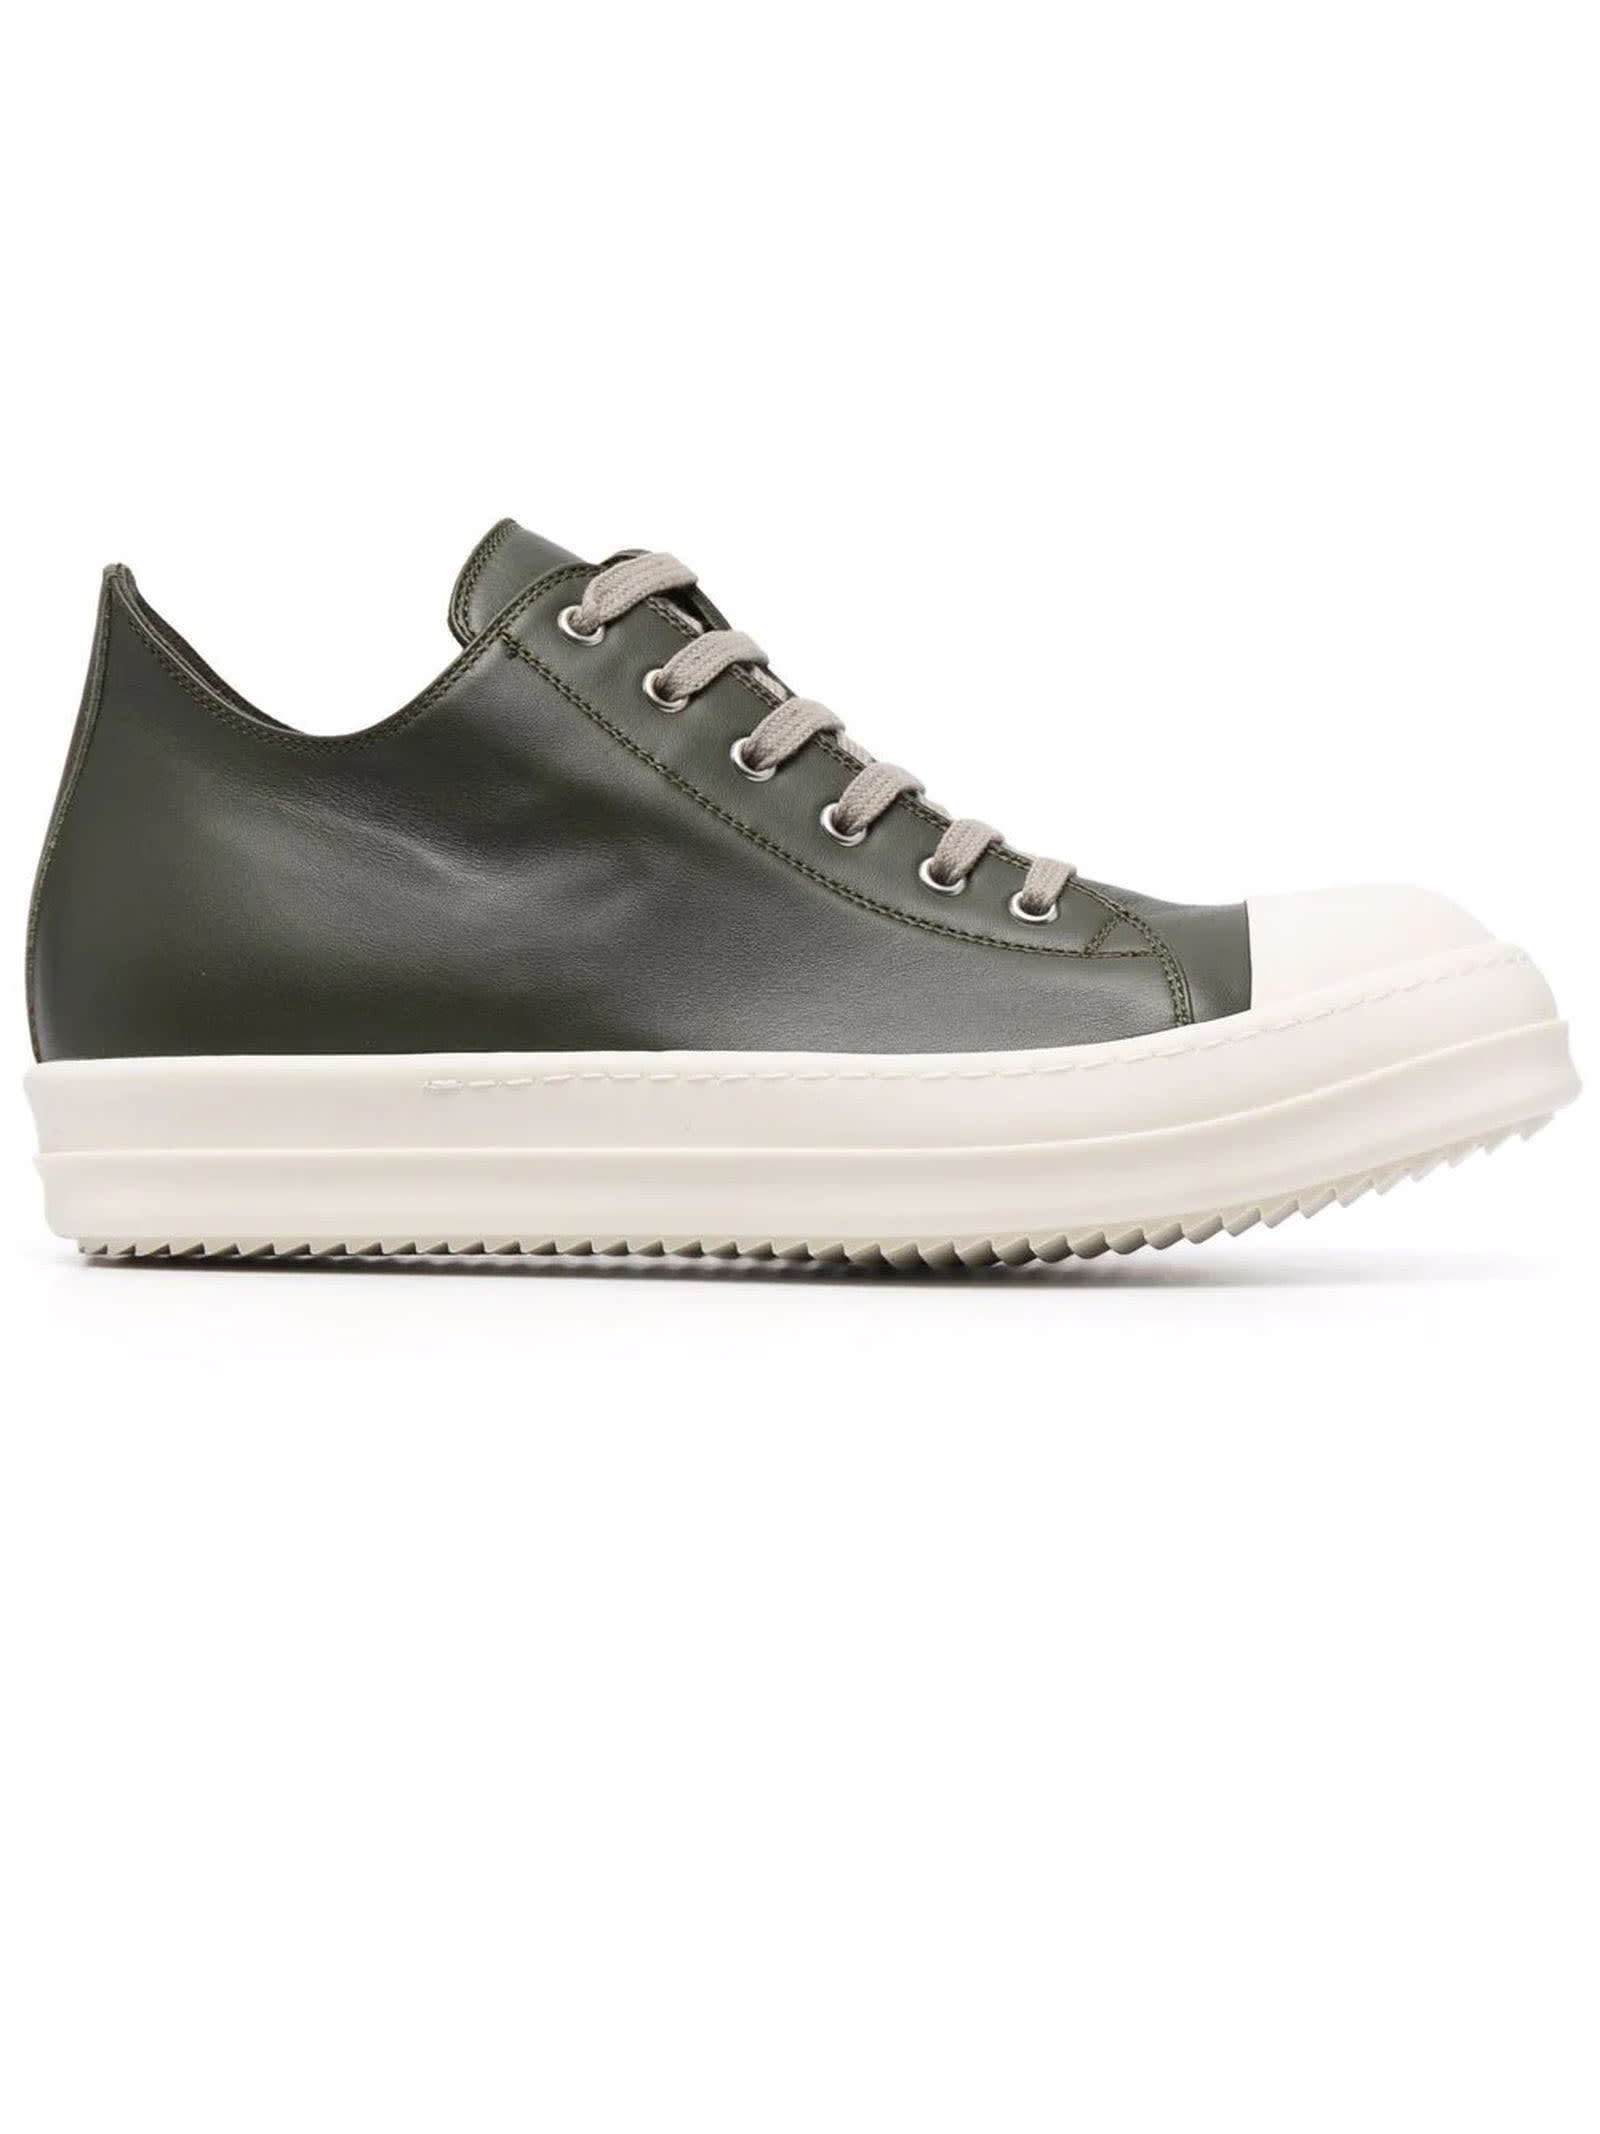 Rick Owens Olive Green Leather Low Top Sneakers